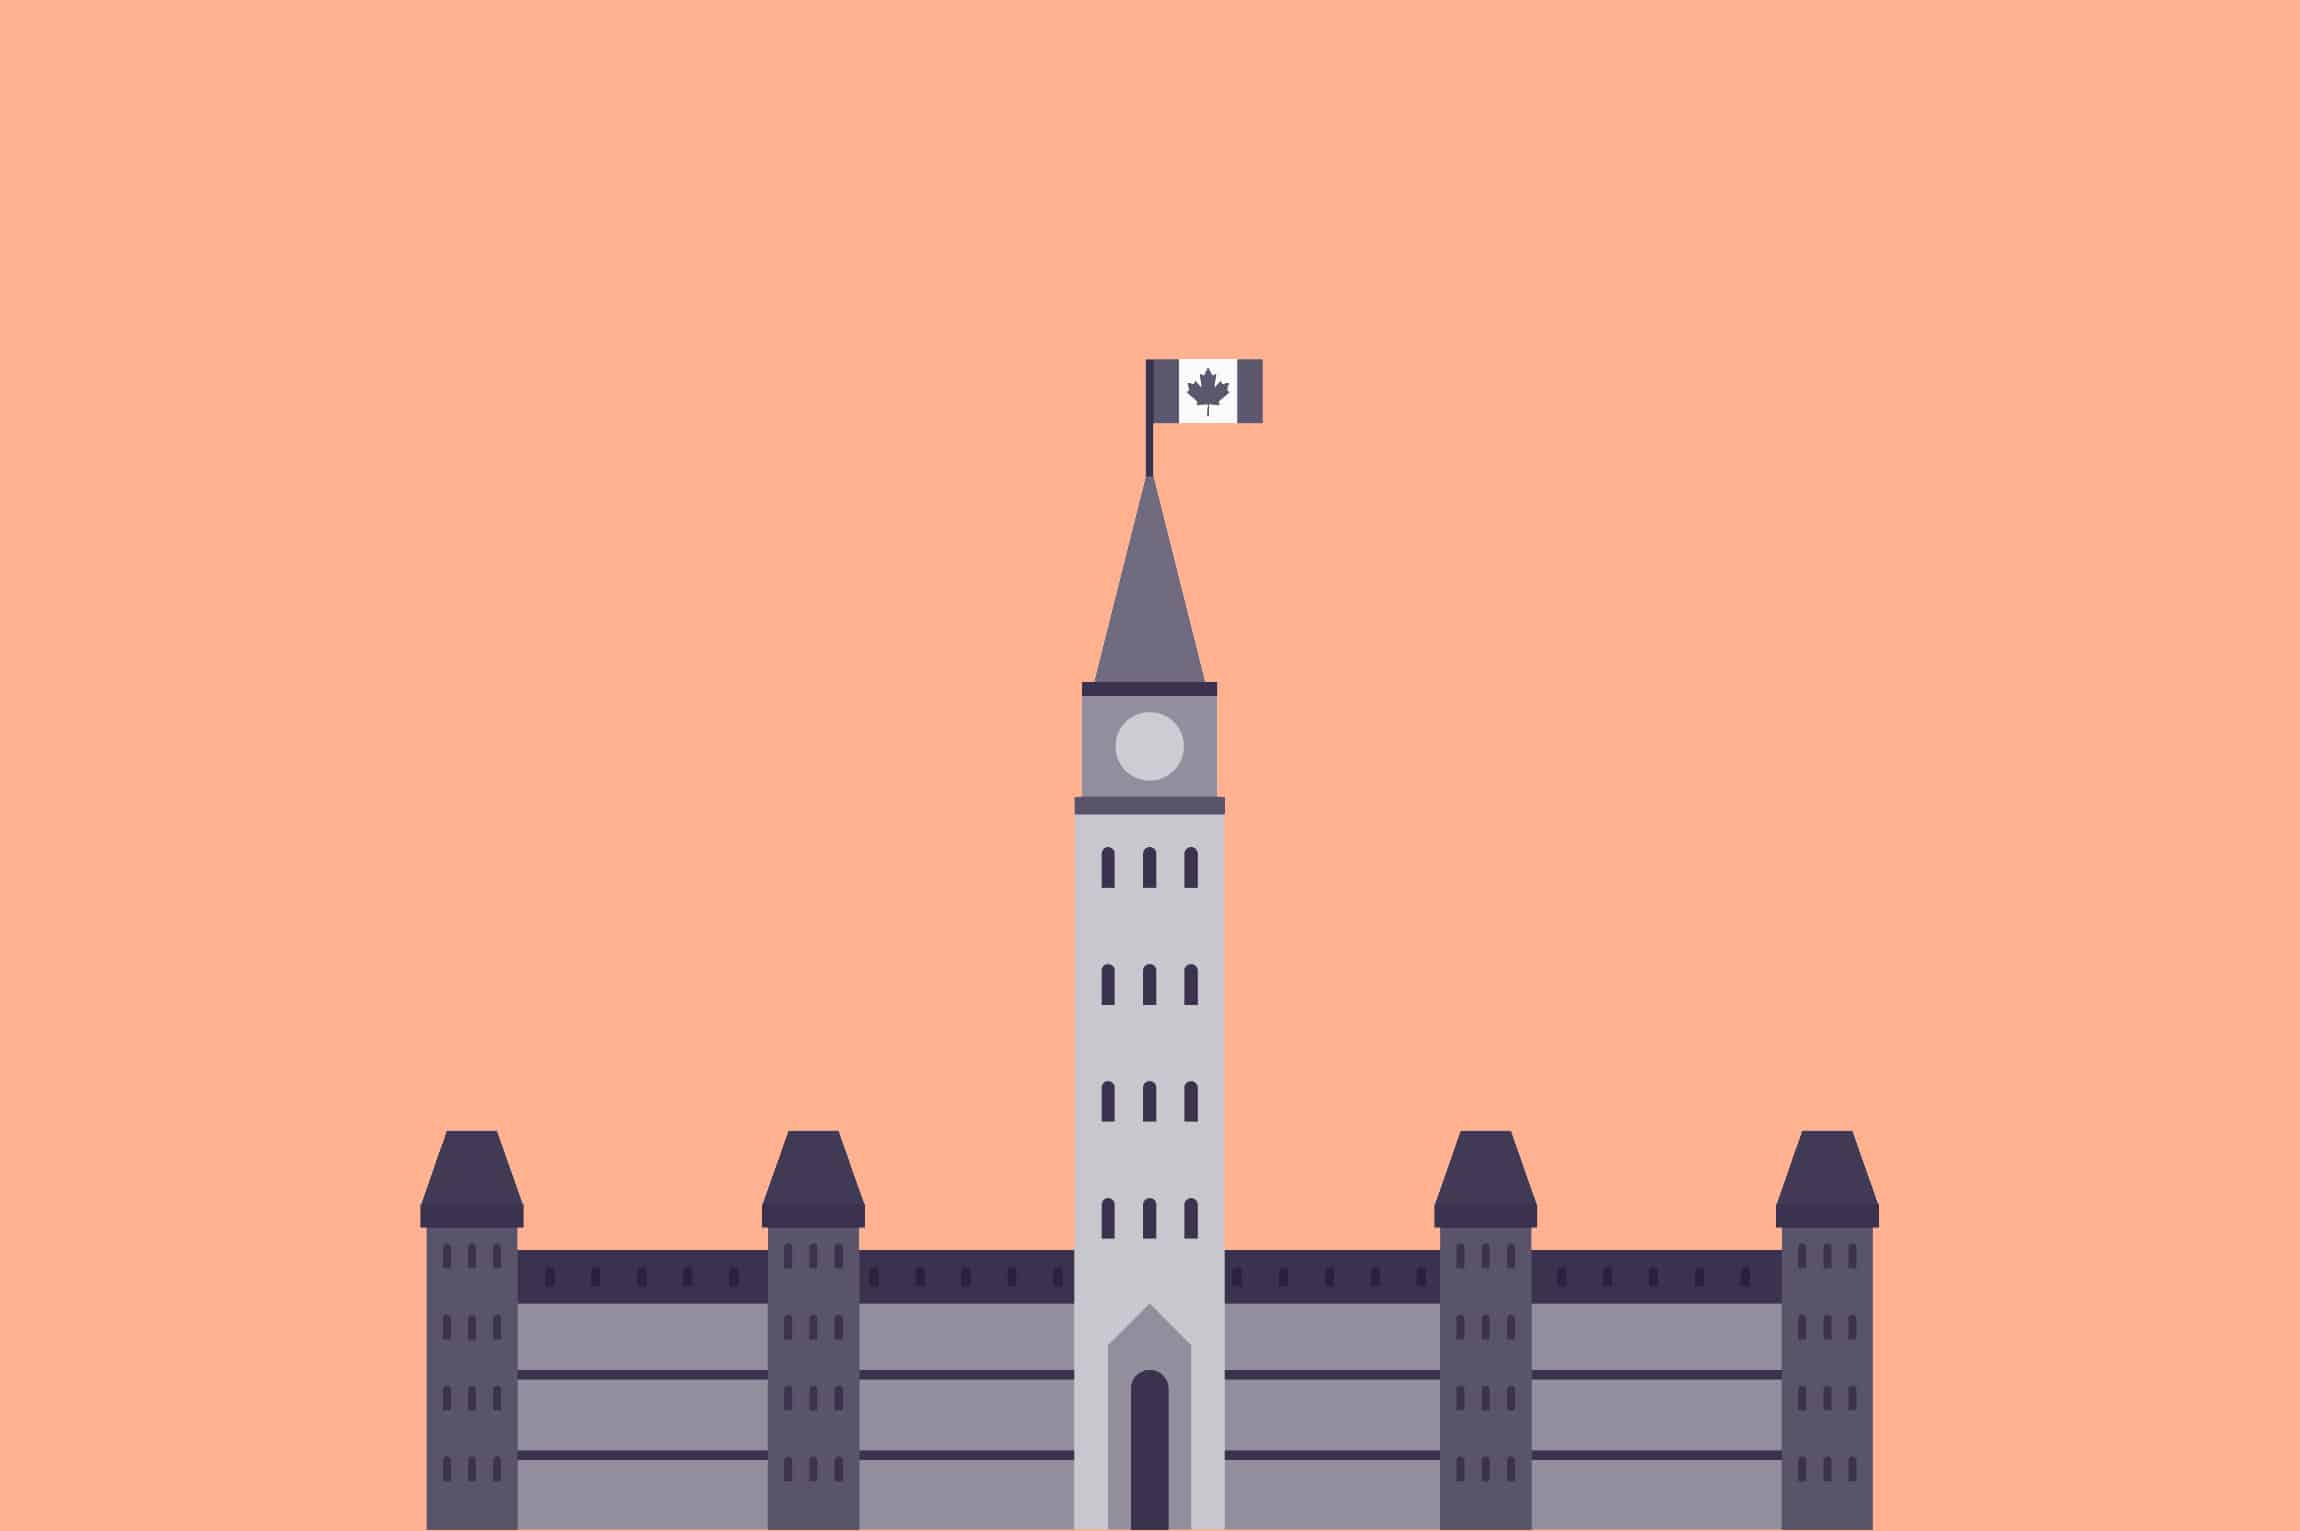 The parliament building in Ottawa in an orange background